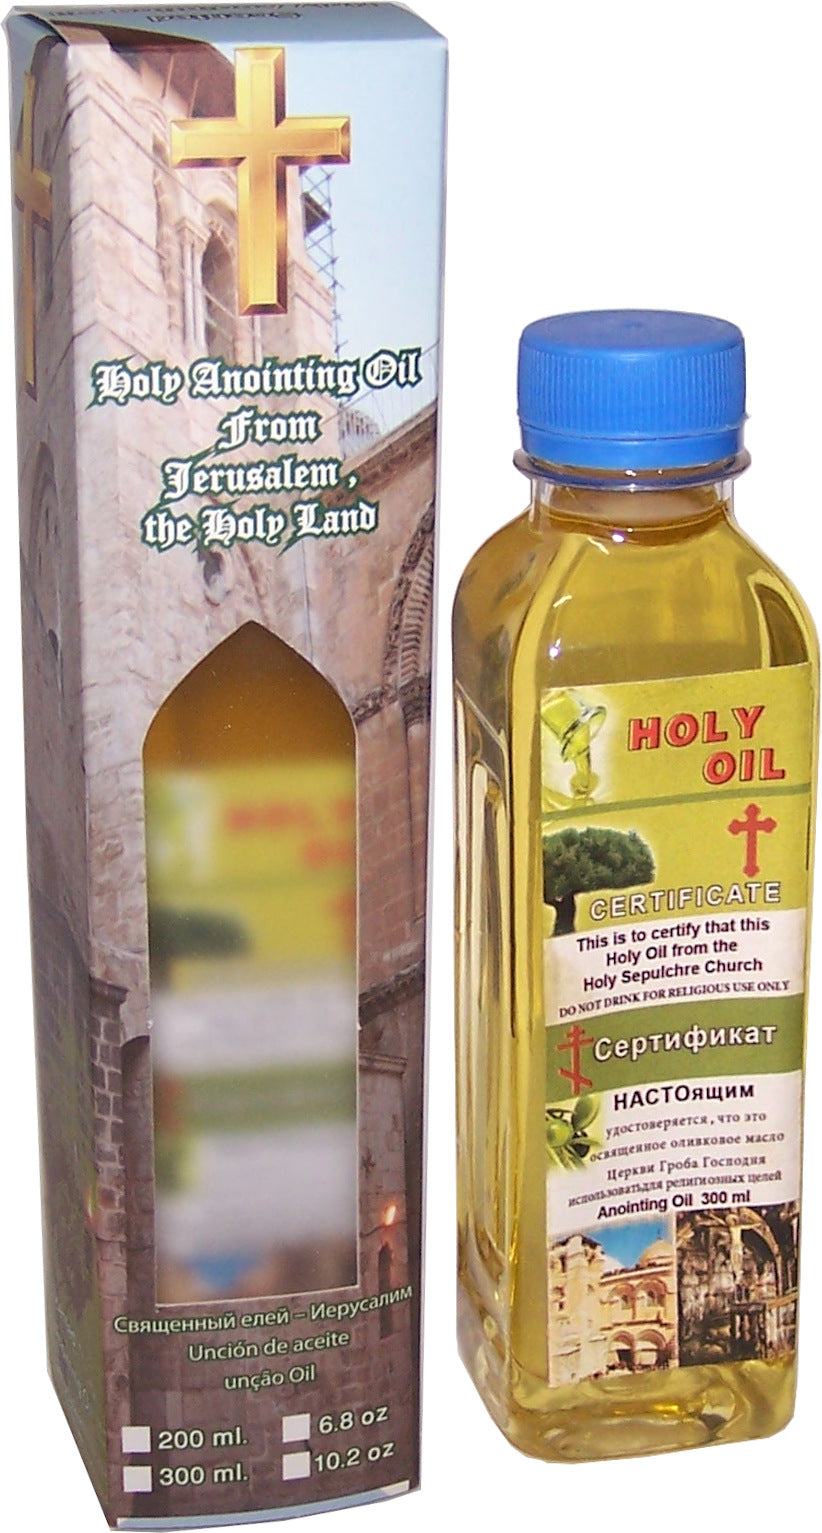 anointing oil in the bible